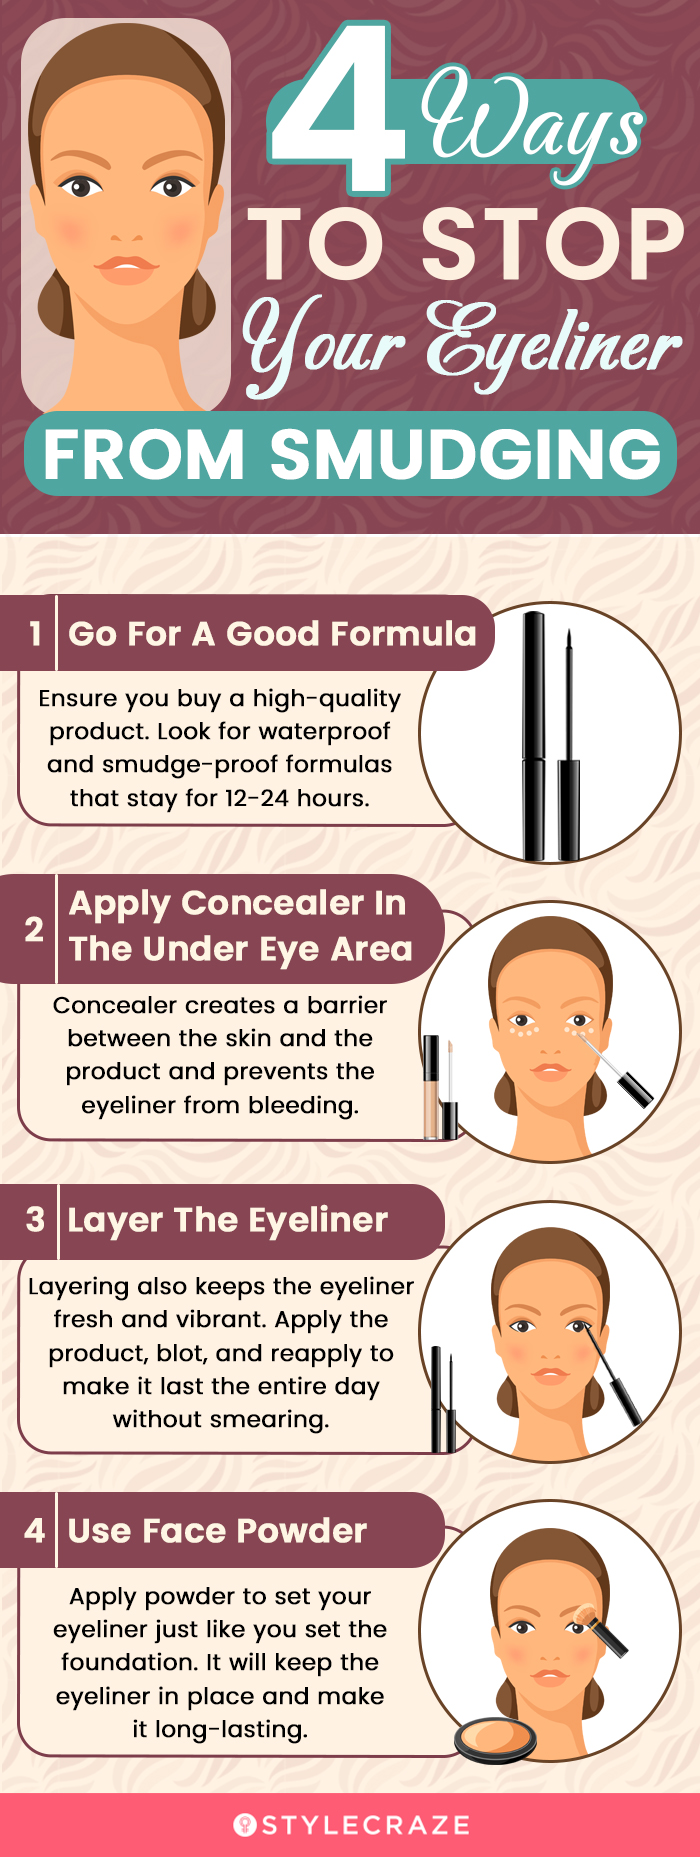 4 ways to stop your eyeliner from smudging (infographic)